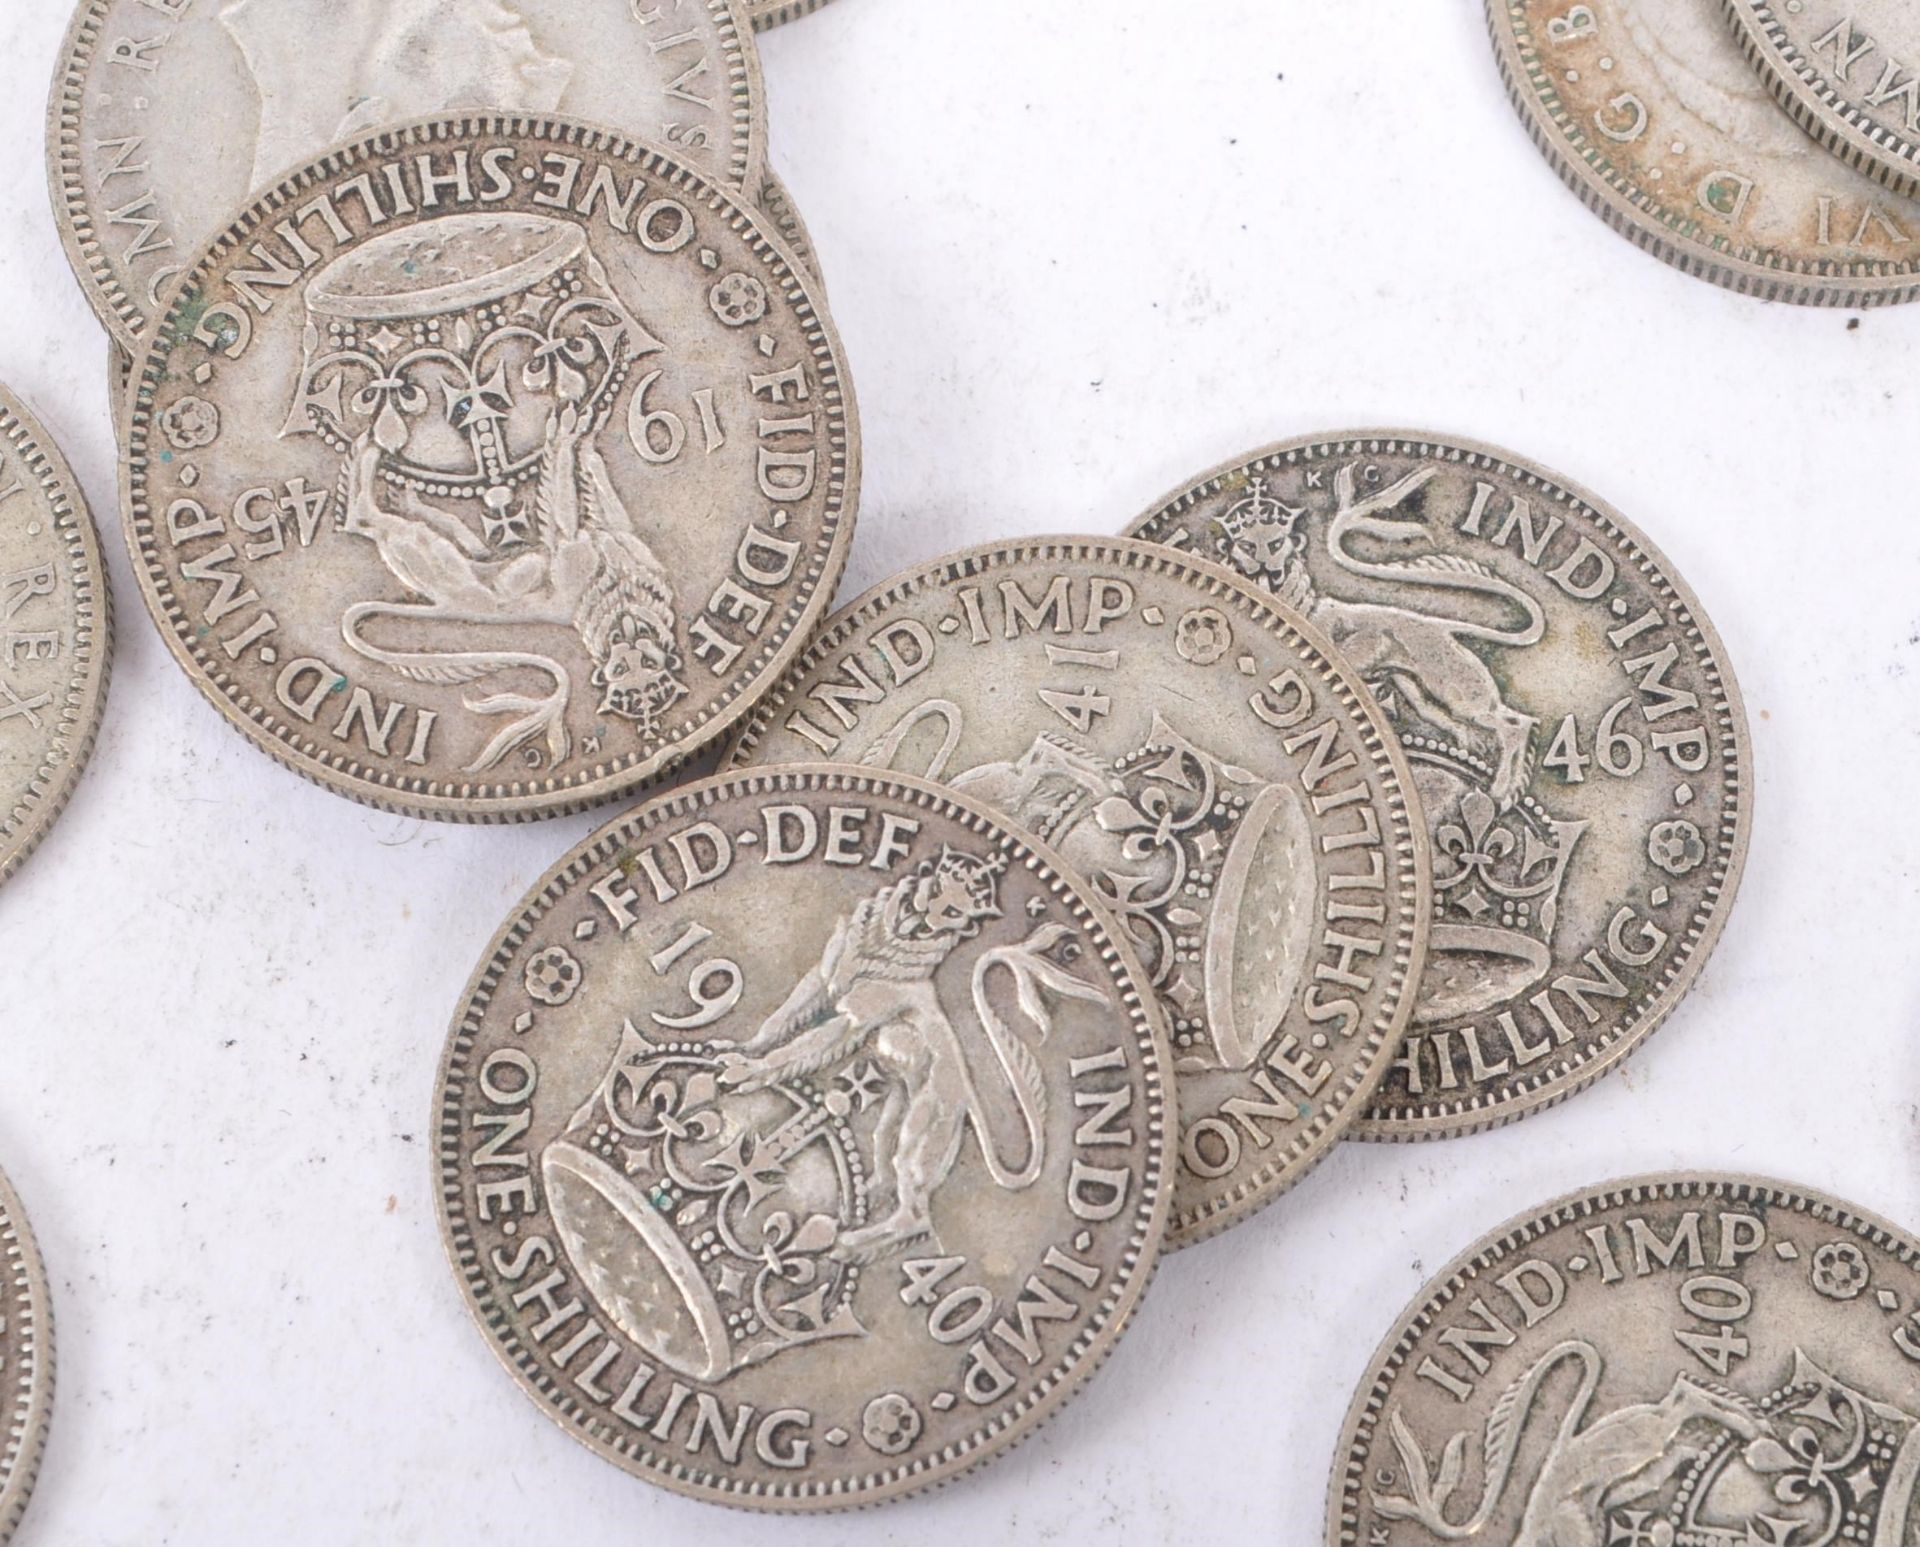 COLLECTION 20TH CENTURY BRITISH SHILLING COINS - Image 6 of 6